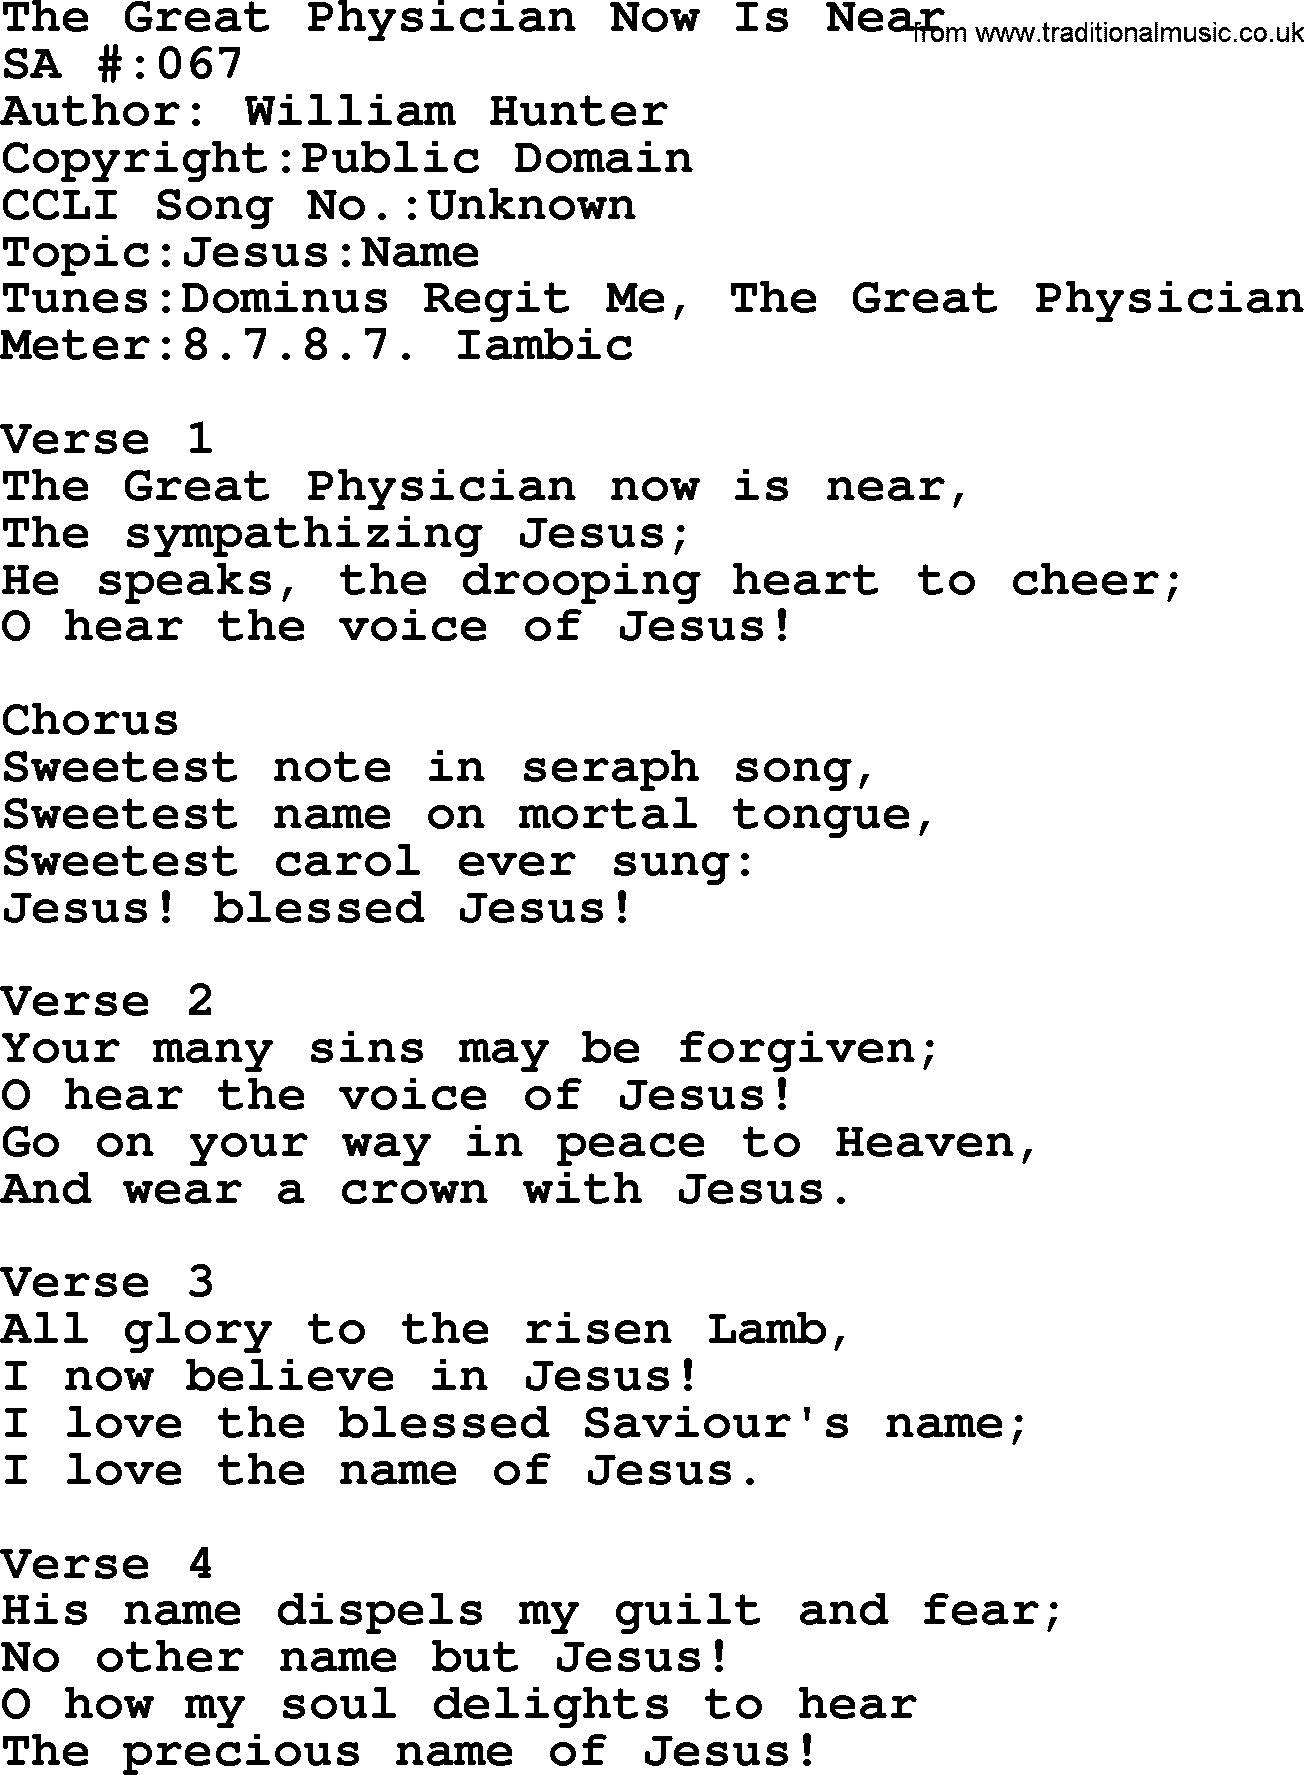 Salvation Army Hymnal, title: The Great Physician Now Is Near, with lyrics and PDF,